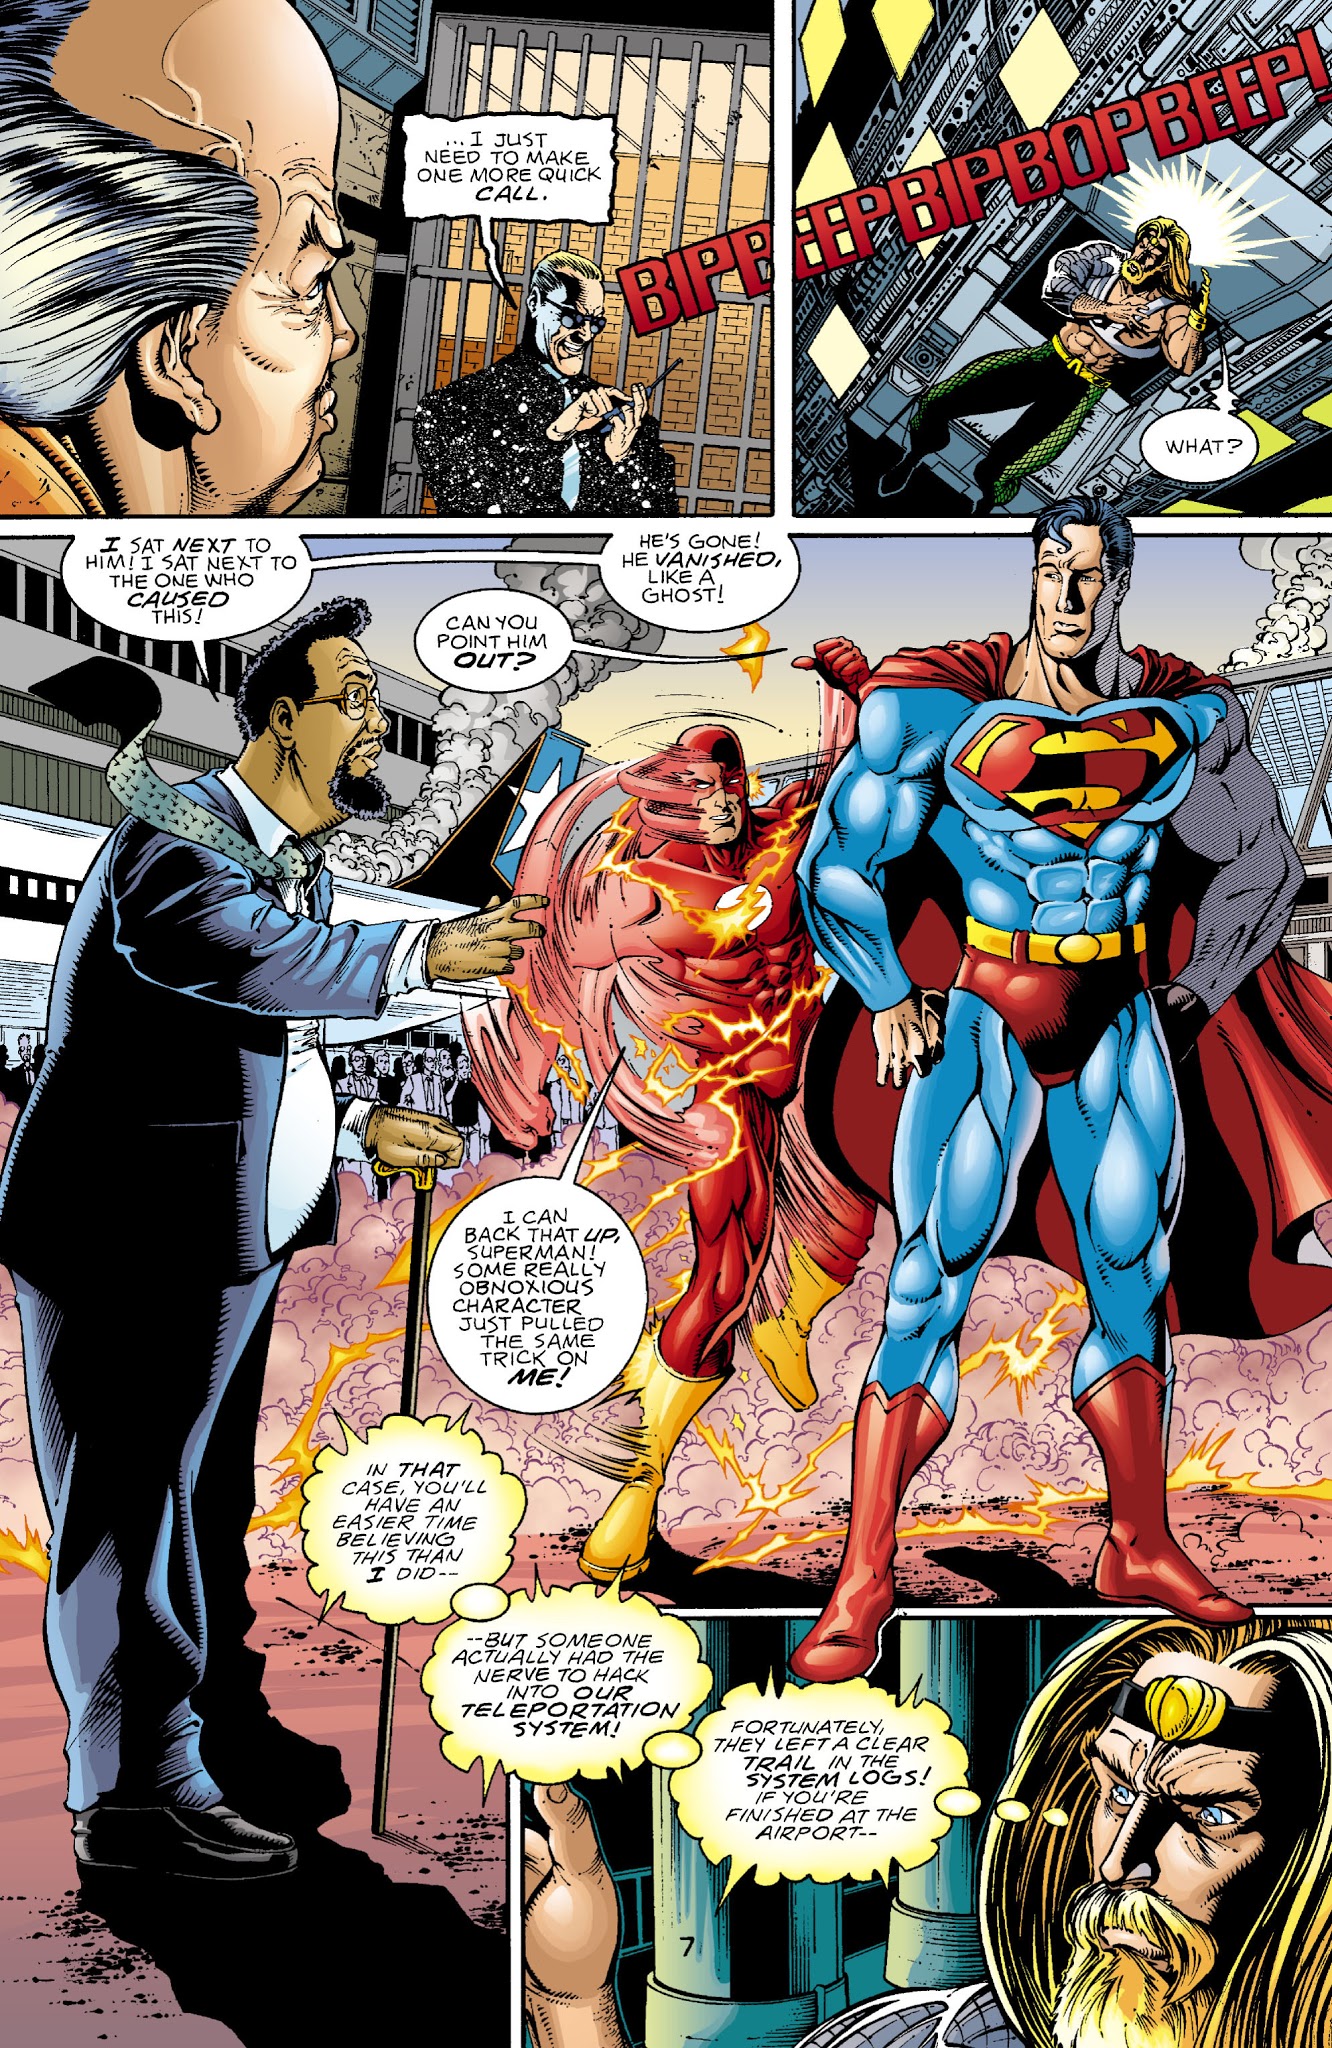 Read online Justice Leagues: JL? comic -  Issue # Full - 7